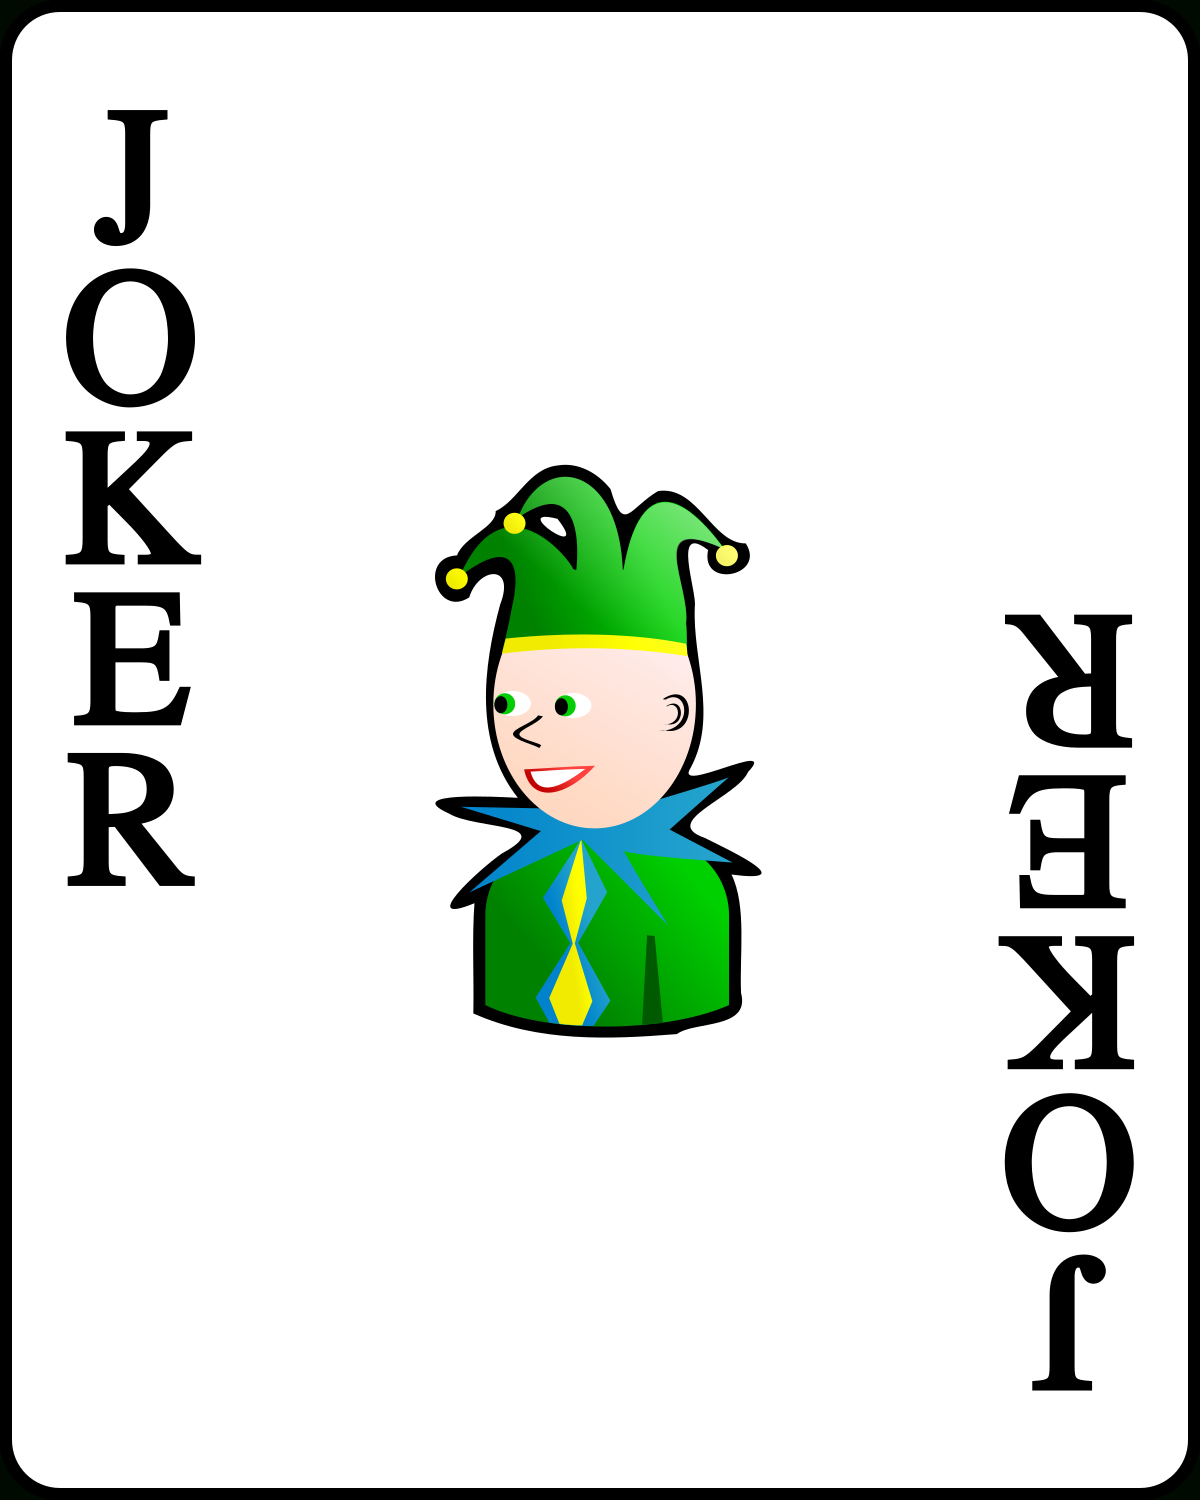 File:playing Card Black Joker.svg – Wikimedia Commons With Joker Card Template